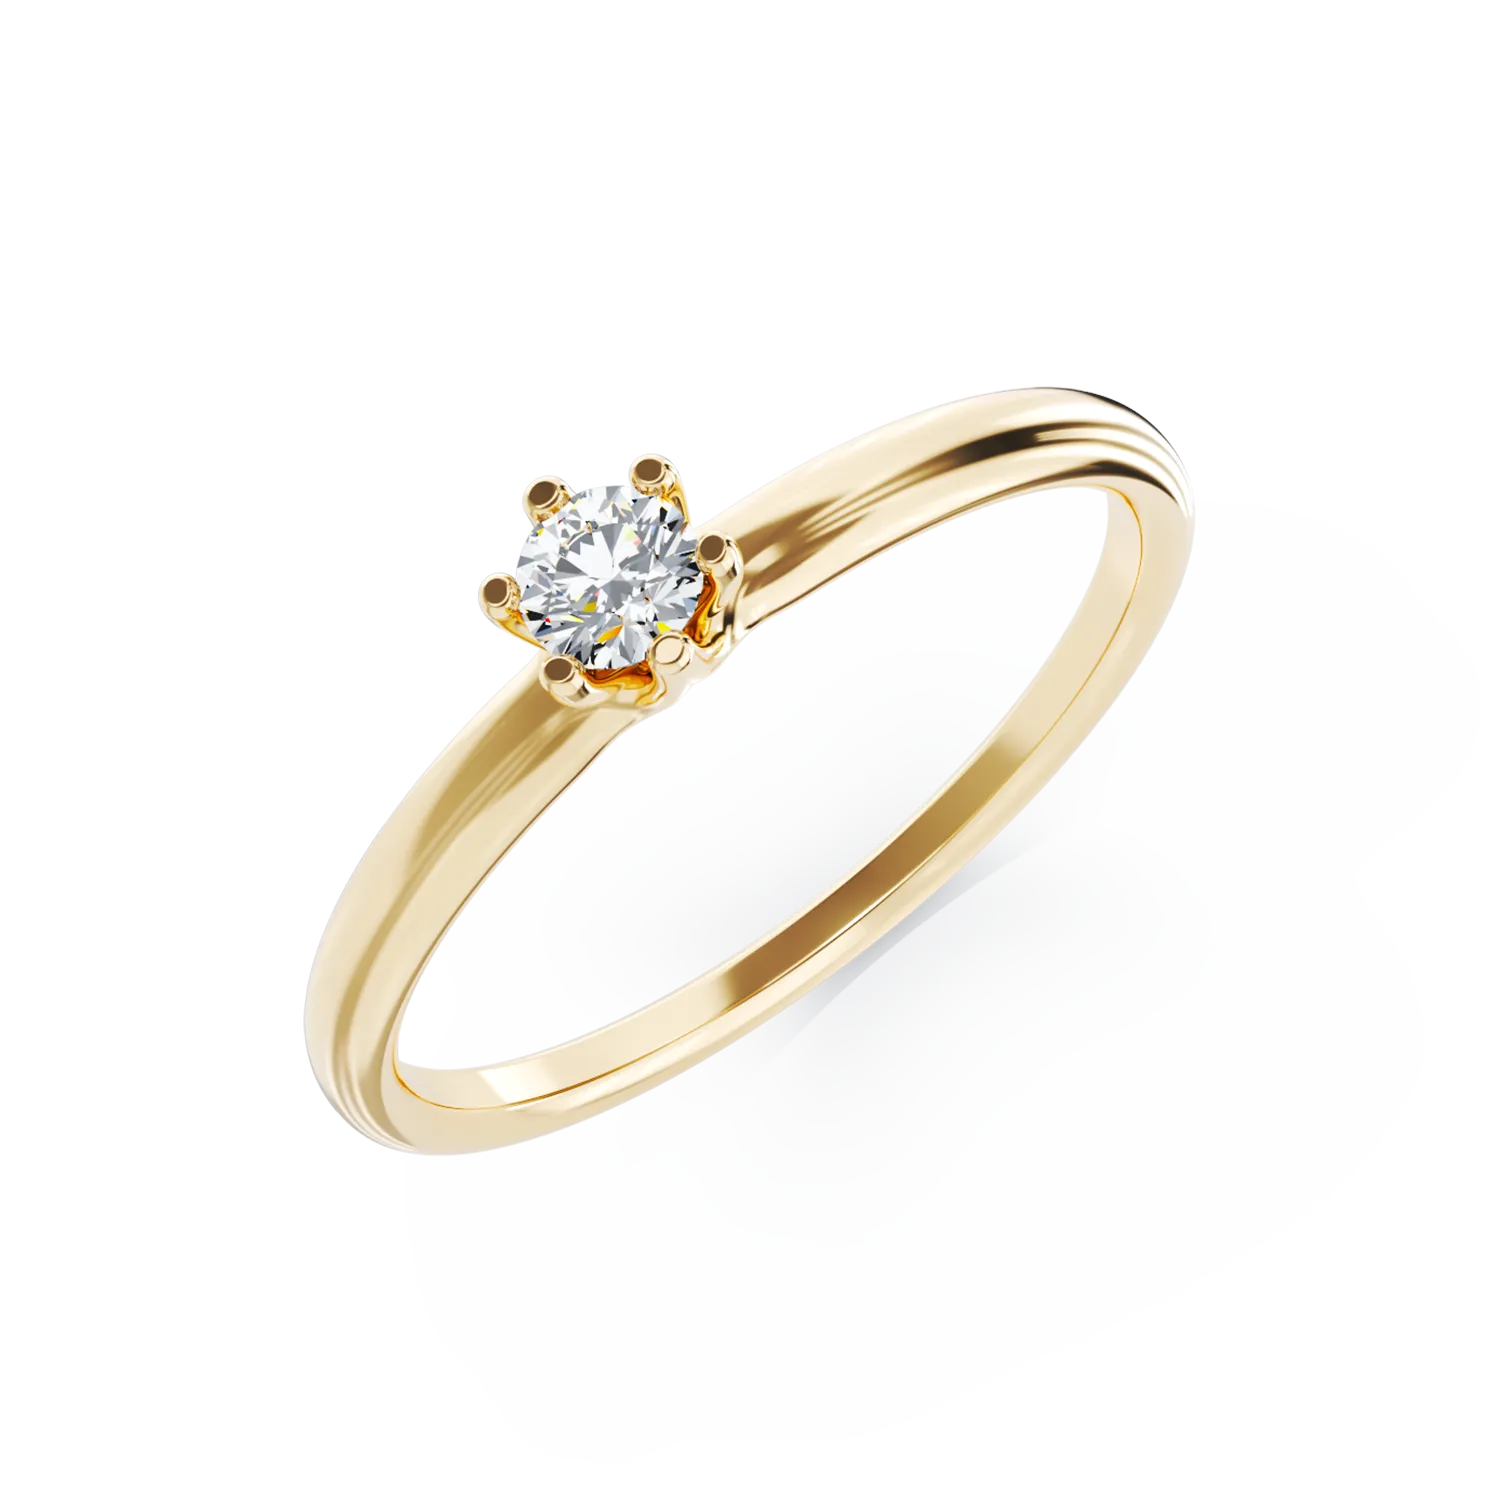 18K yellow gold engagement ring with a 0.21ct solitaire diamond